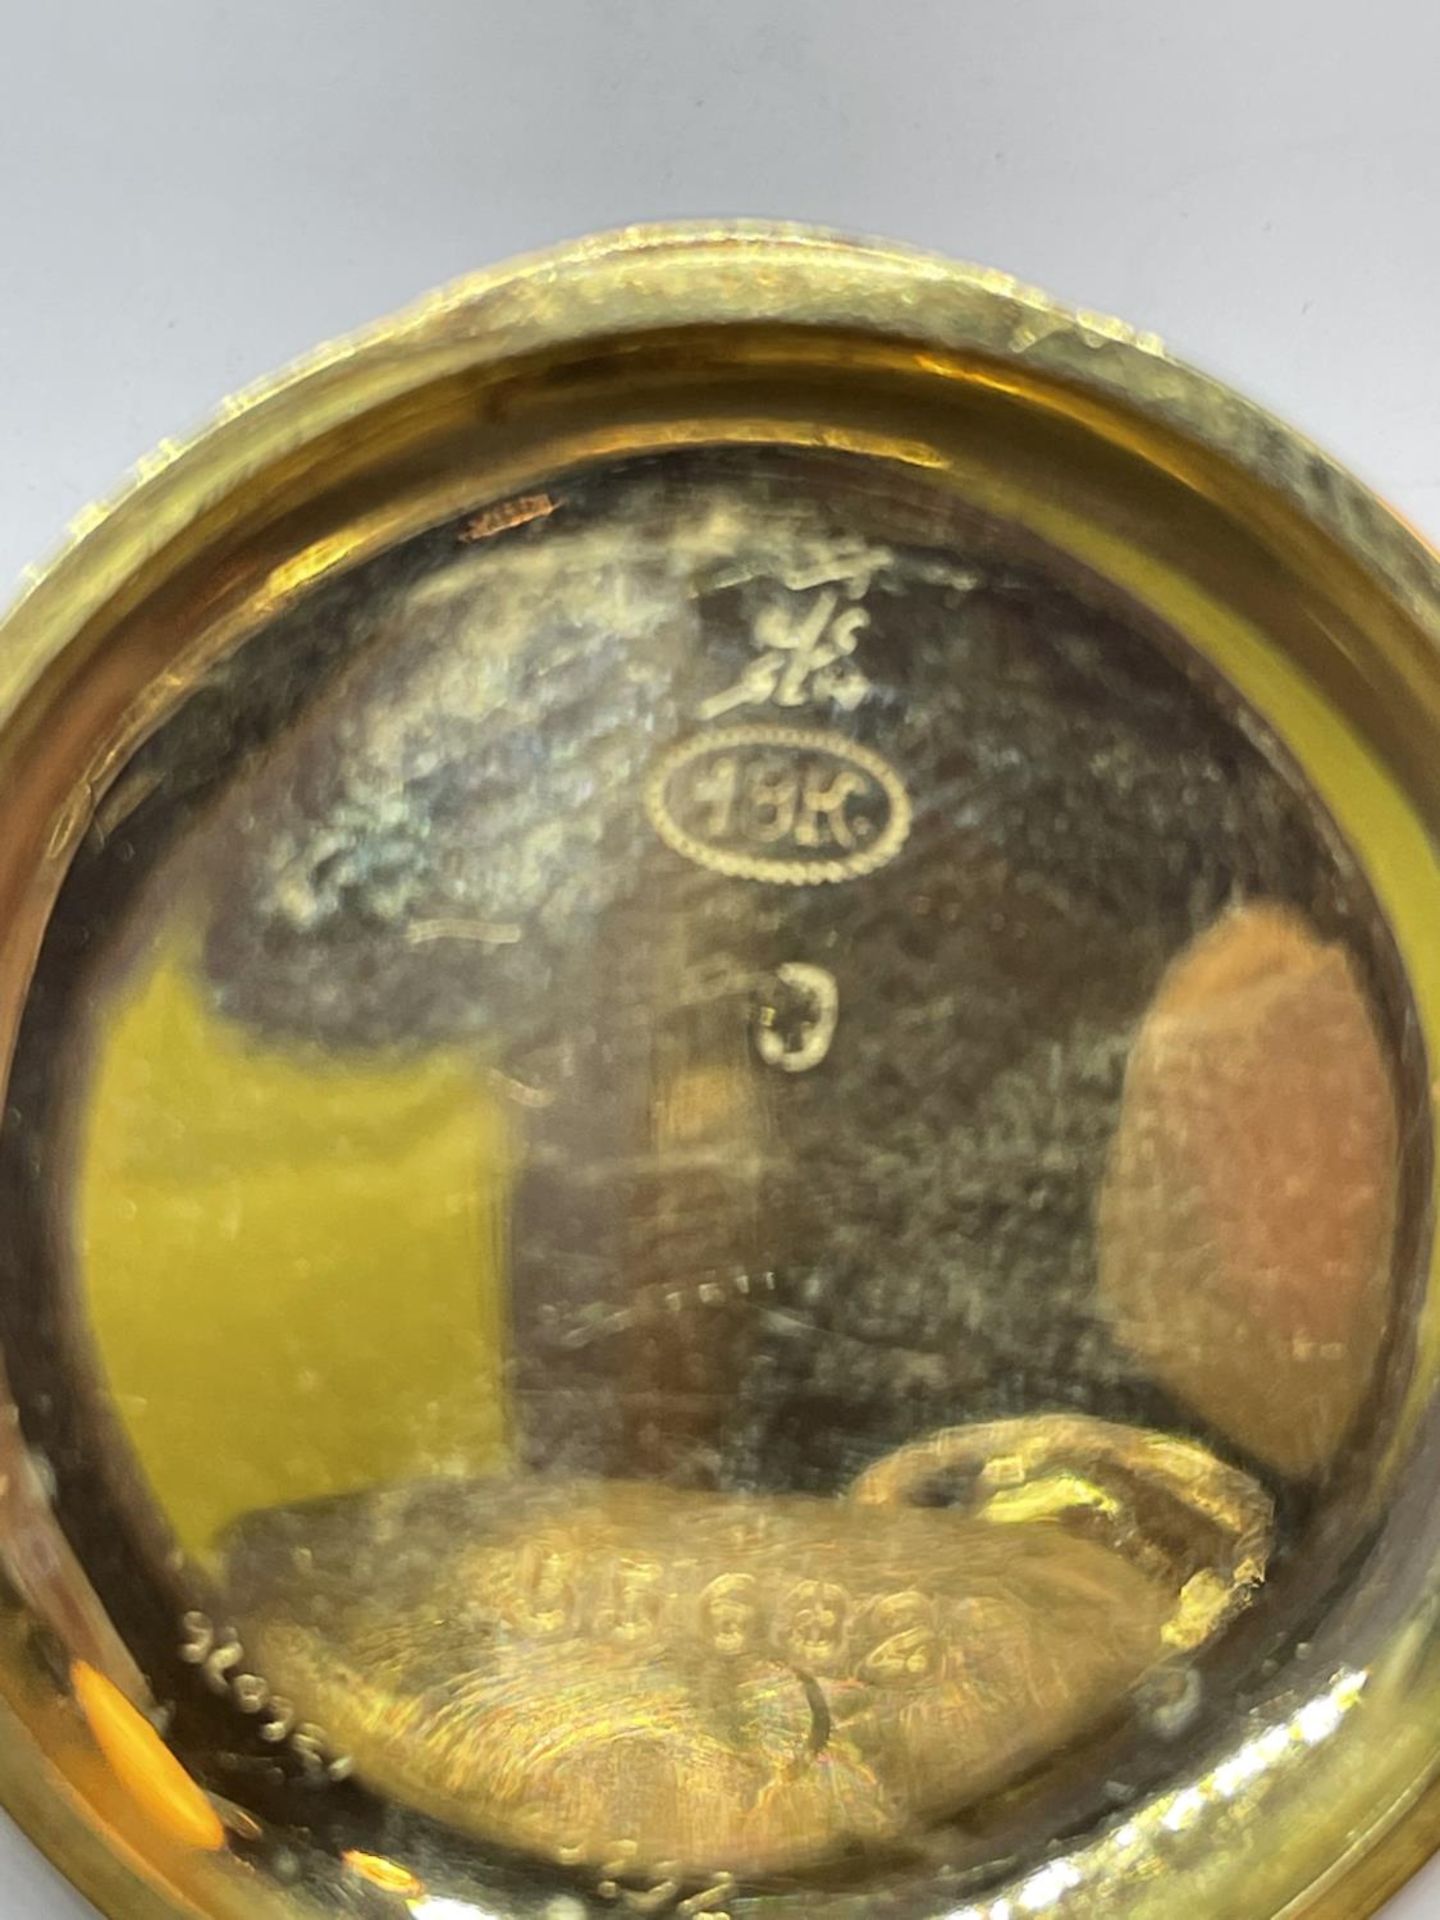 AN 18CT GOLD TOP WIND POCKET WATCH WITH WHITE ENAMELLED DIAL AND GOLD HANDS, WITH ORIGINAL BOX - Image 6 of 7